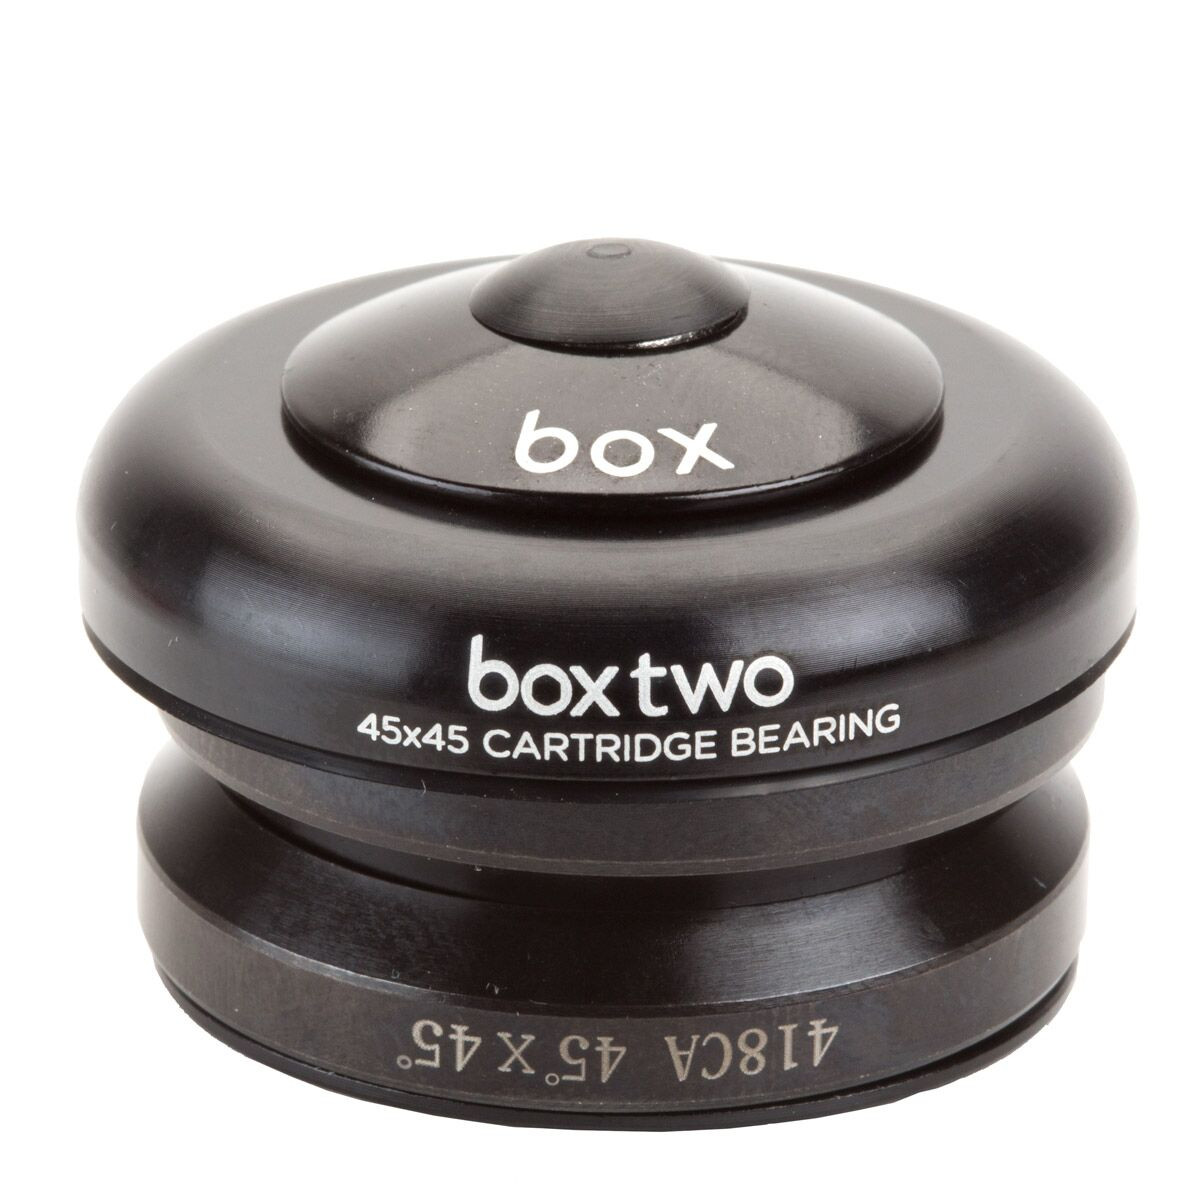 Box two. 45x45 1" Integrated Conversion Headset (for 1 1/8" head tubes)